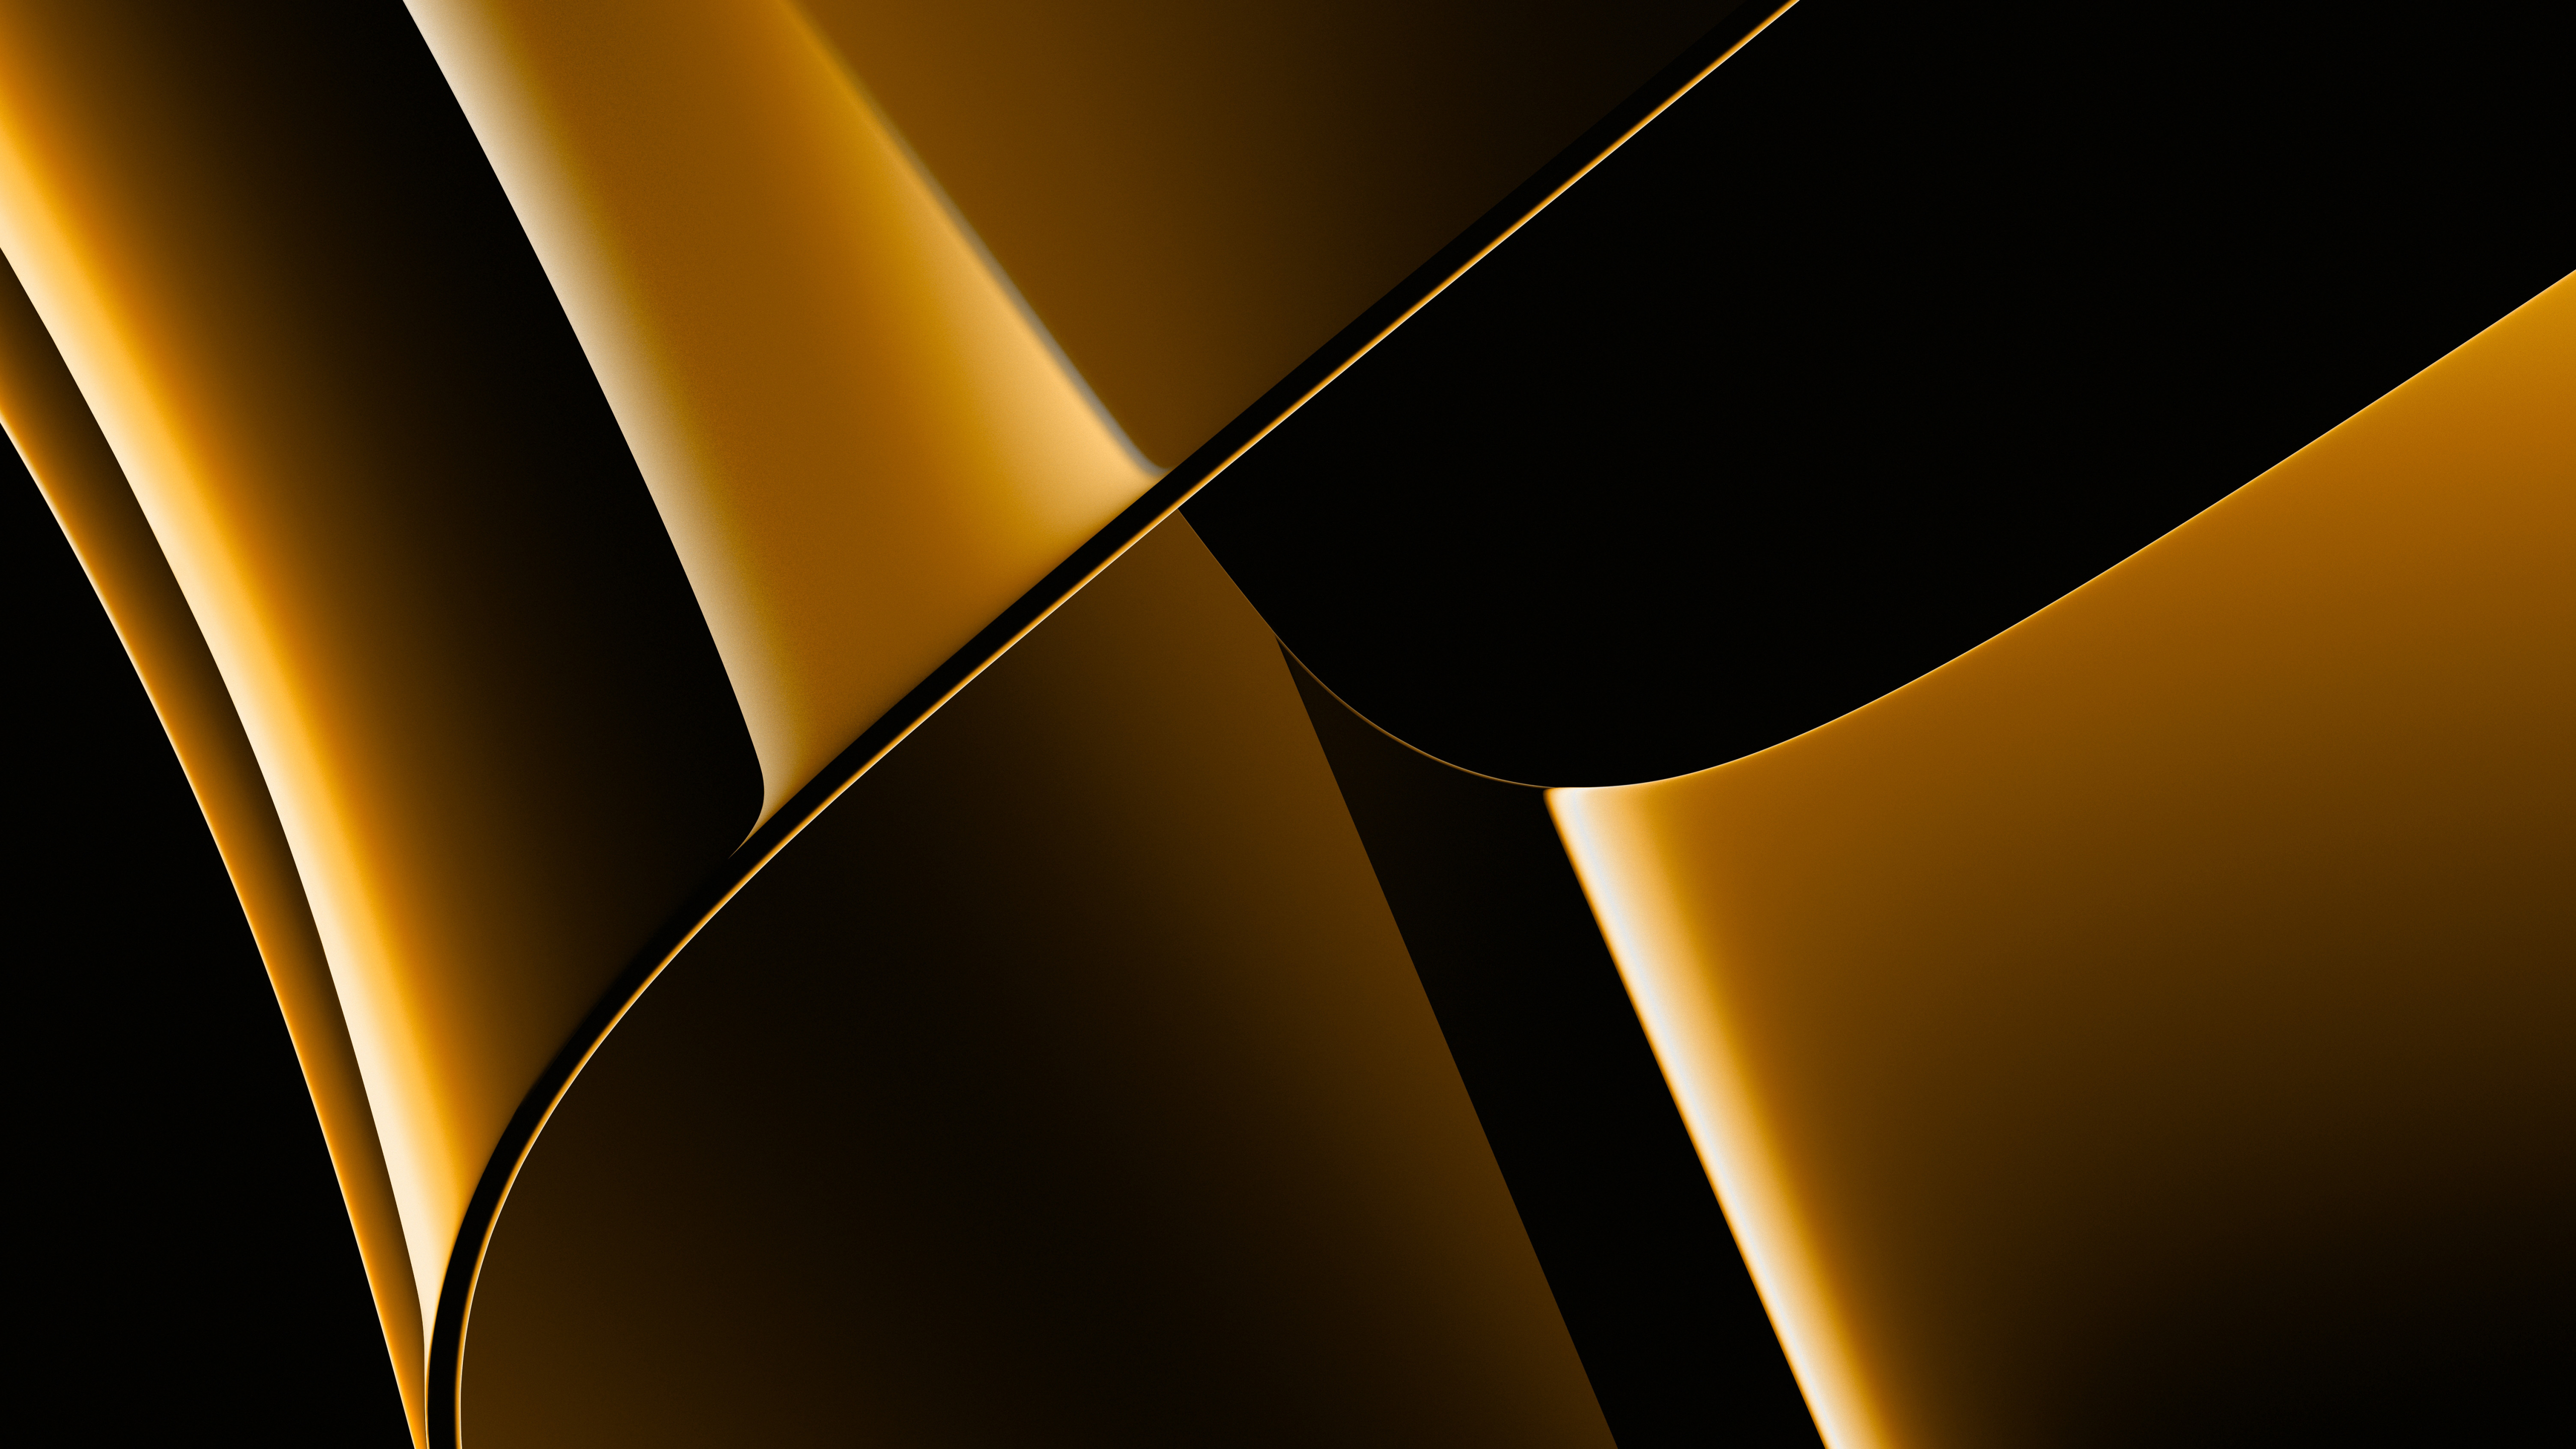 Golden surface, abstract, shapes, 5120x2880, 5k wallpaper